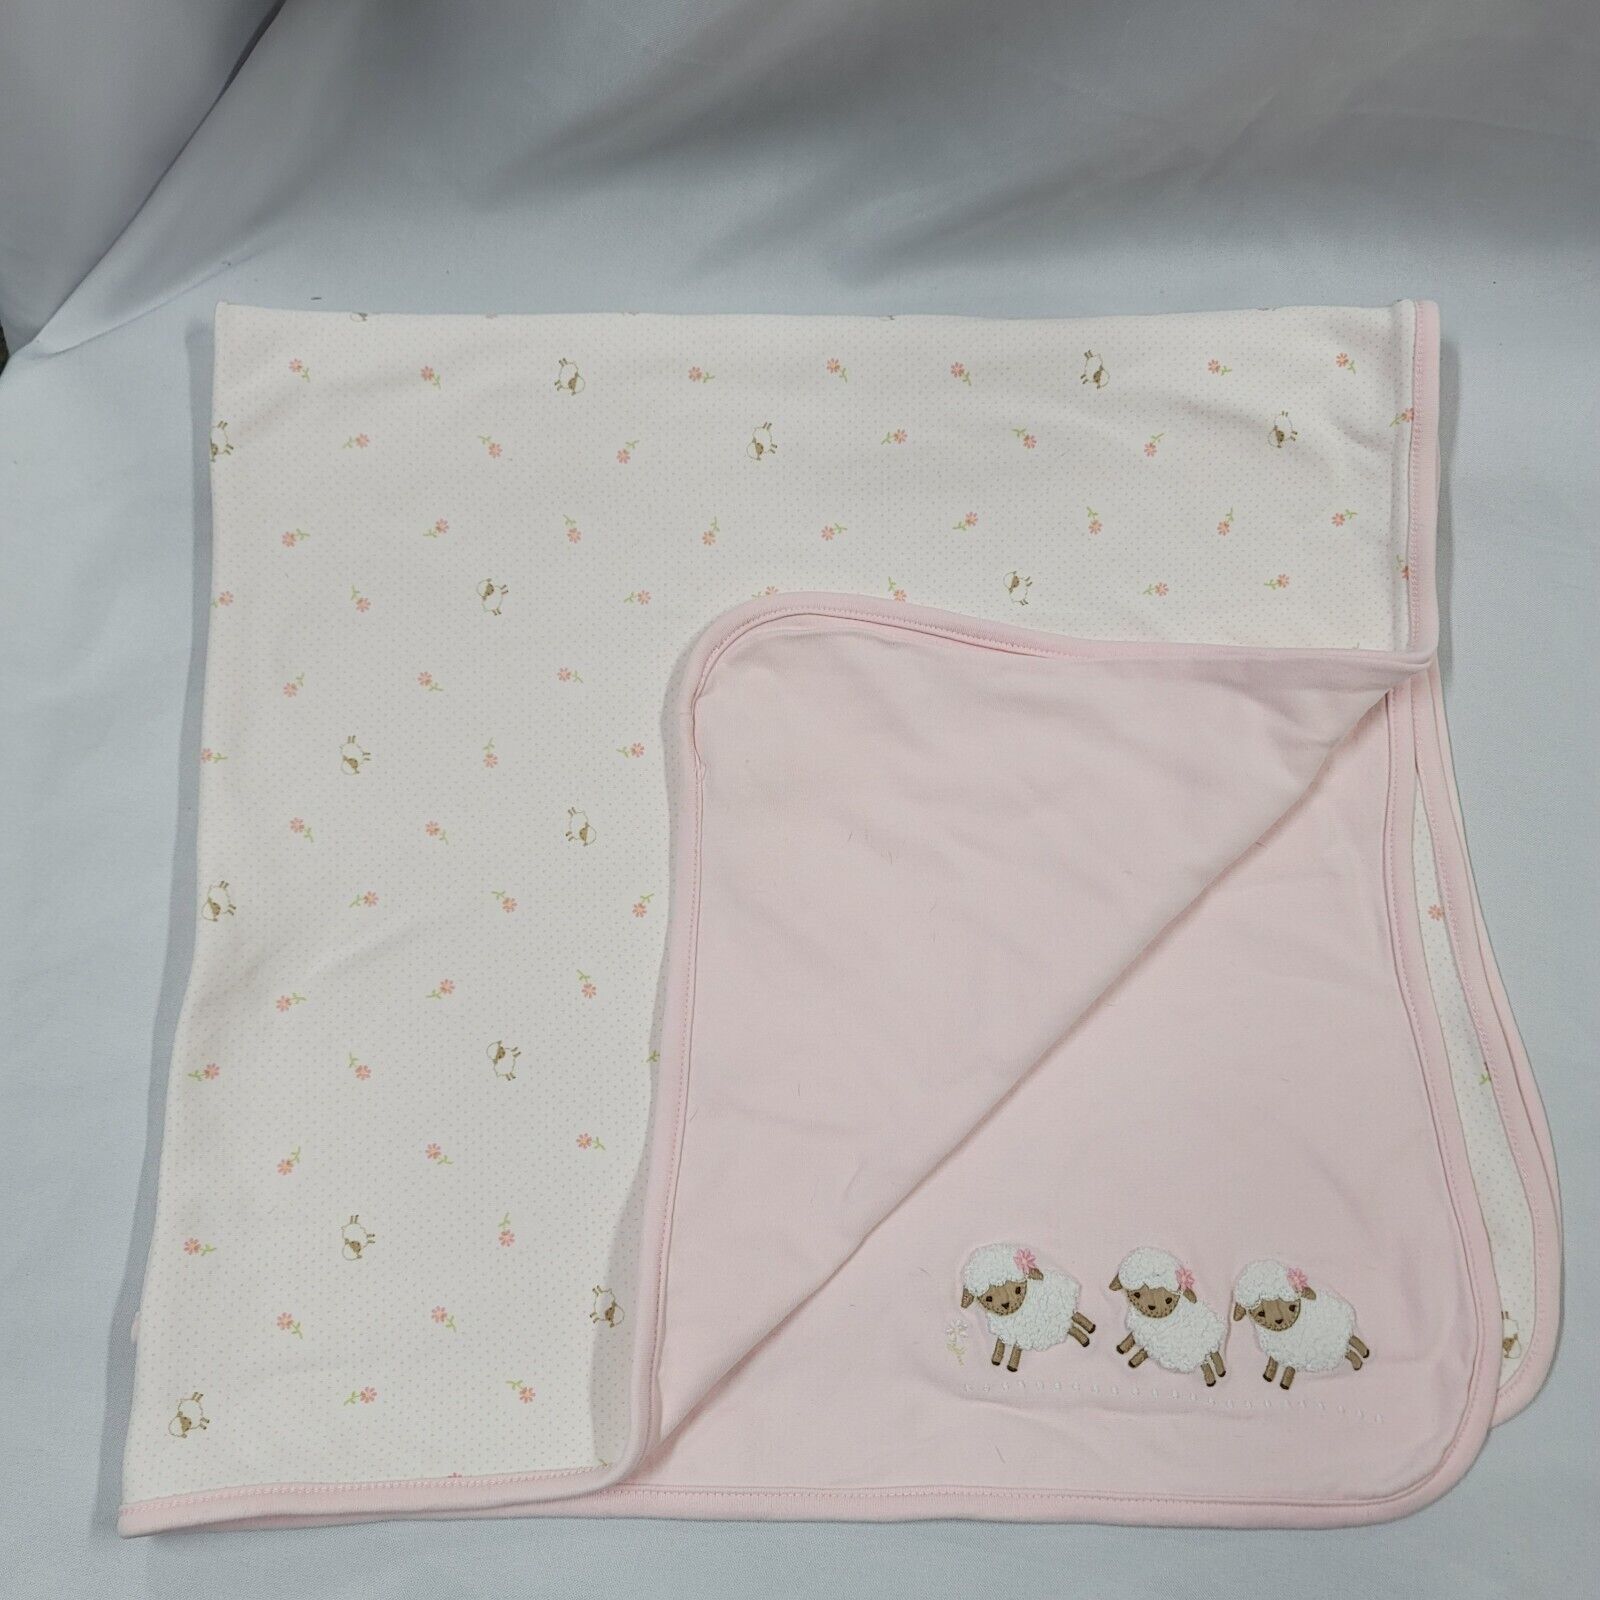 Primary image for 2007 Gymboree Pink 3 Lamb Sheep Cotton Receiving Baby Blanket 30x40